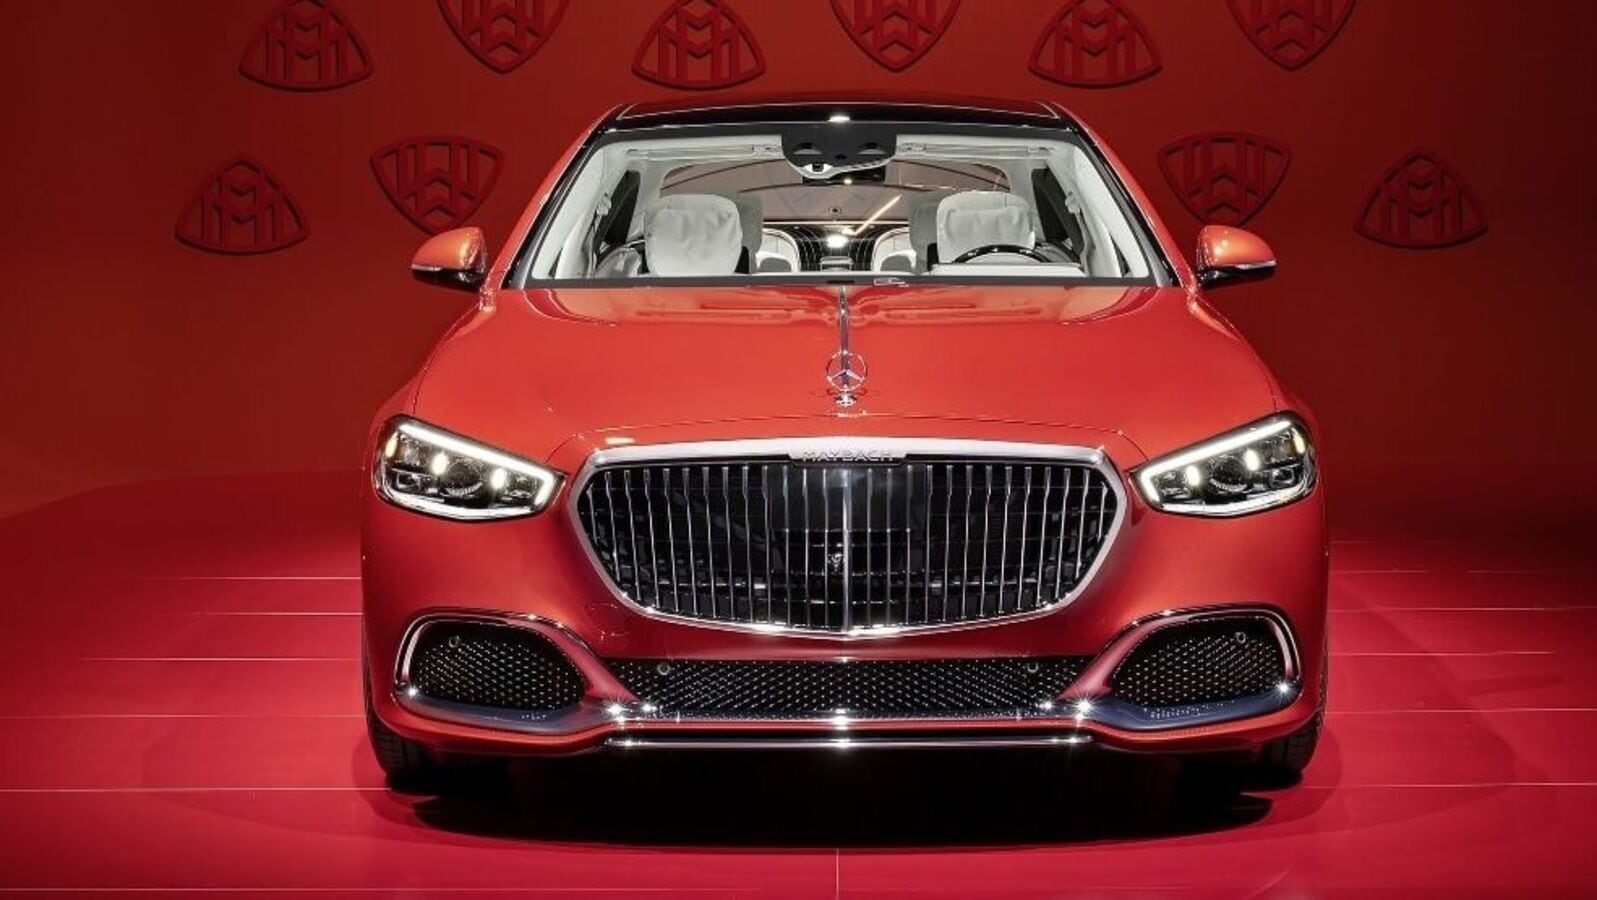 Mercedes Maybach S 580 models to be locally assembled in Chakan